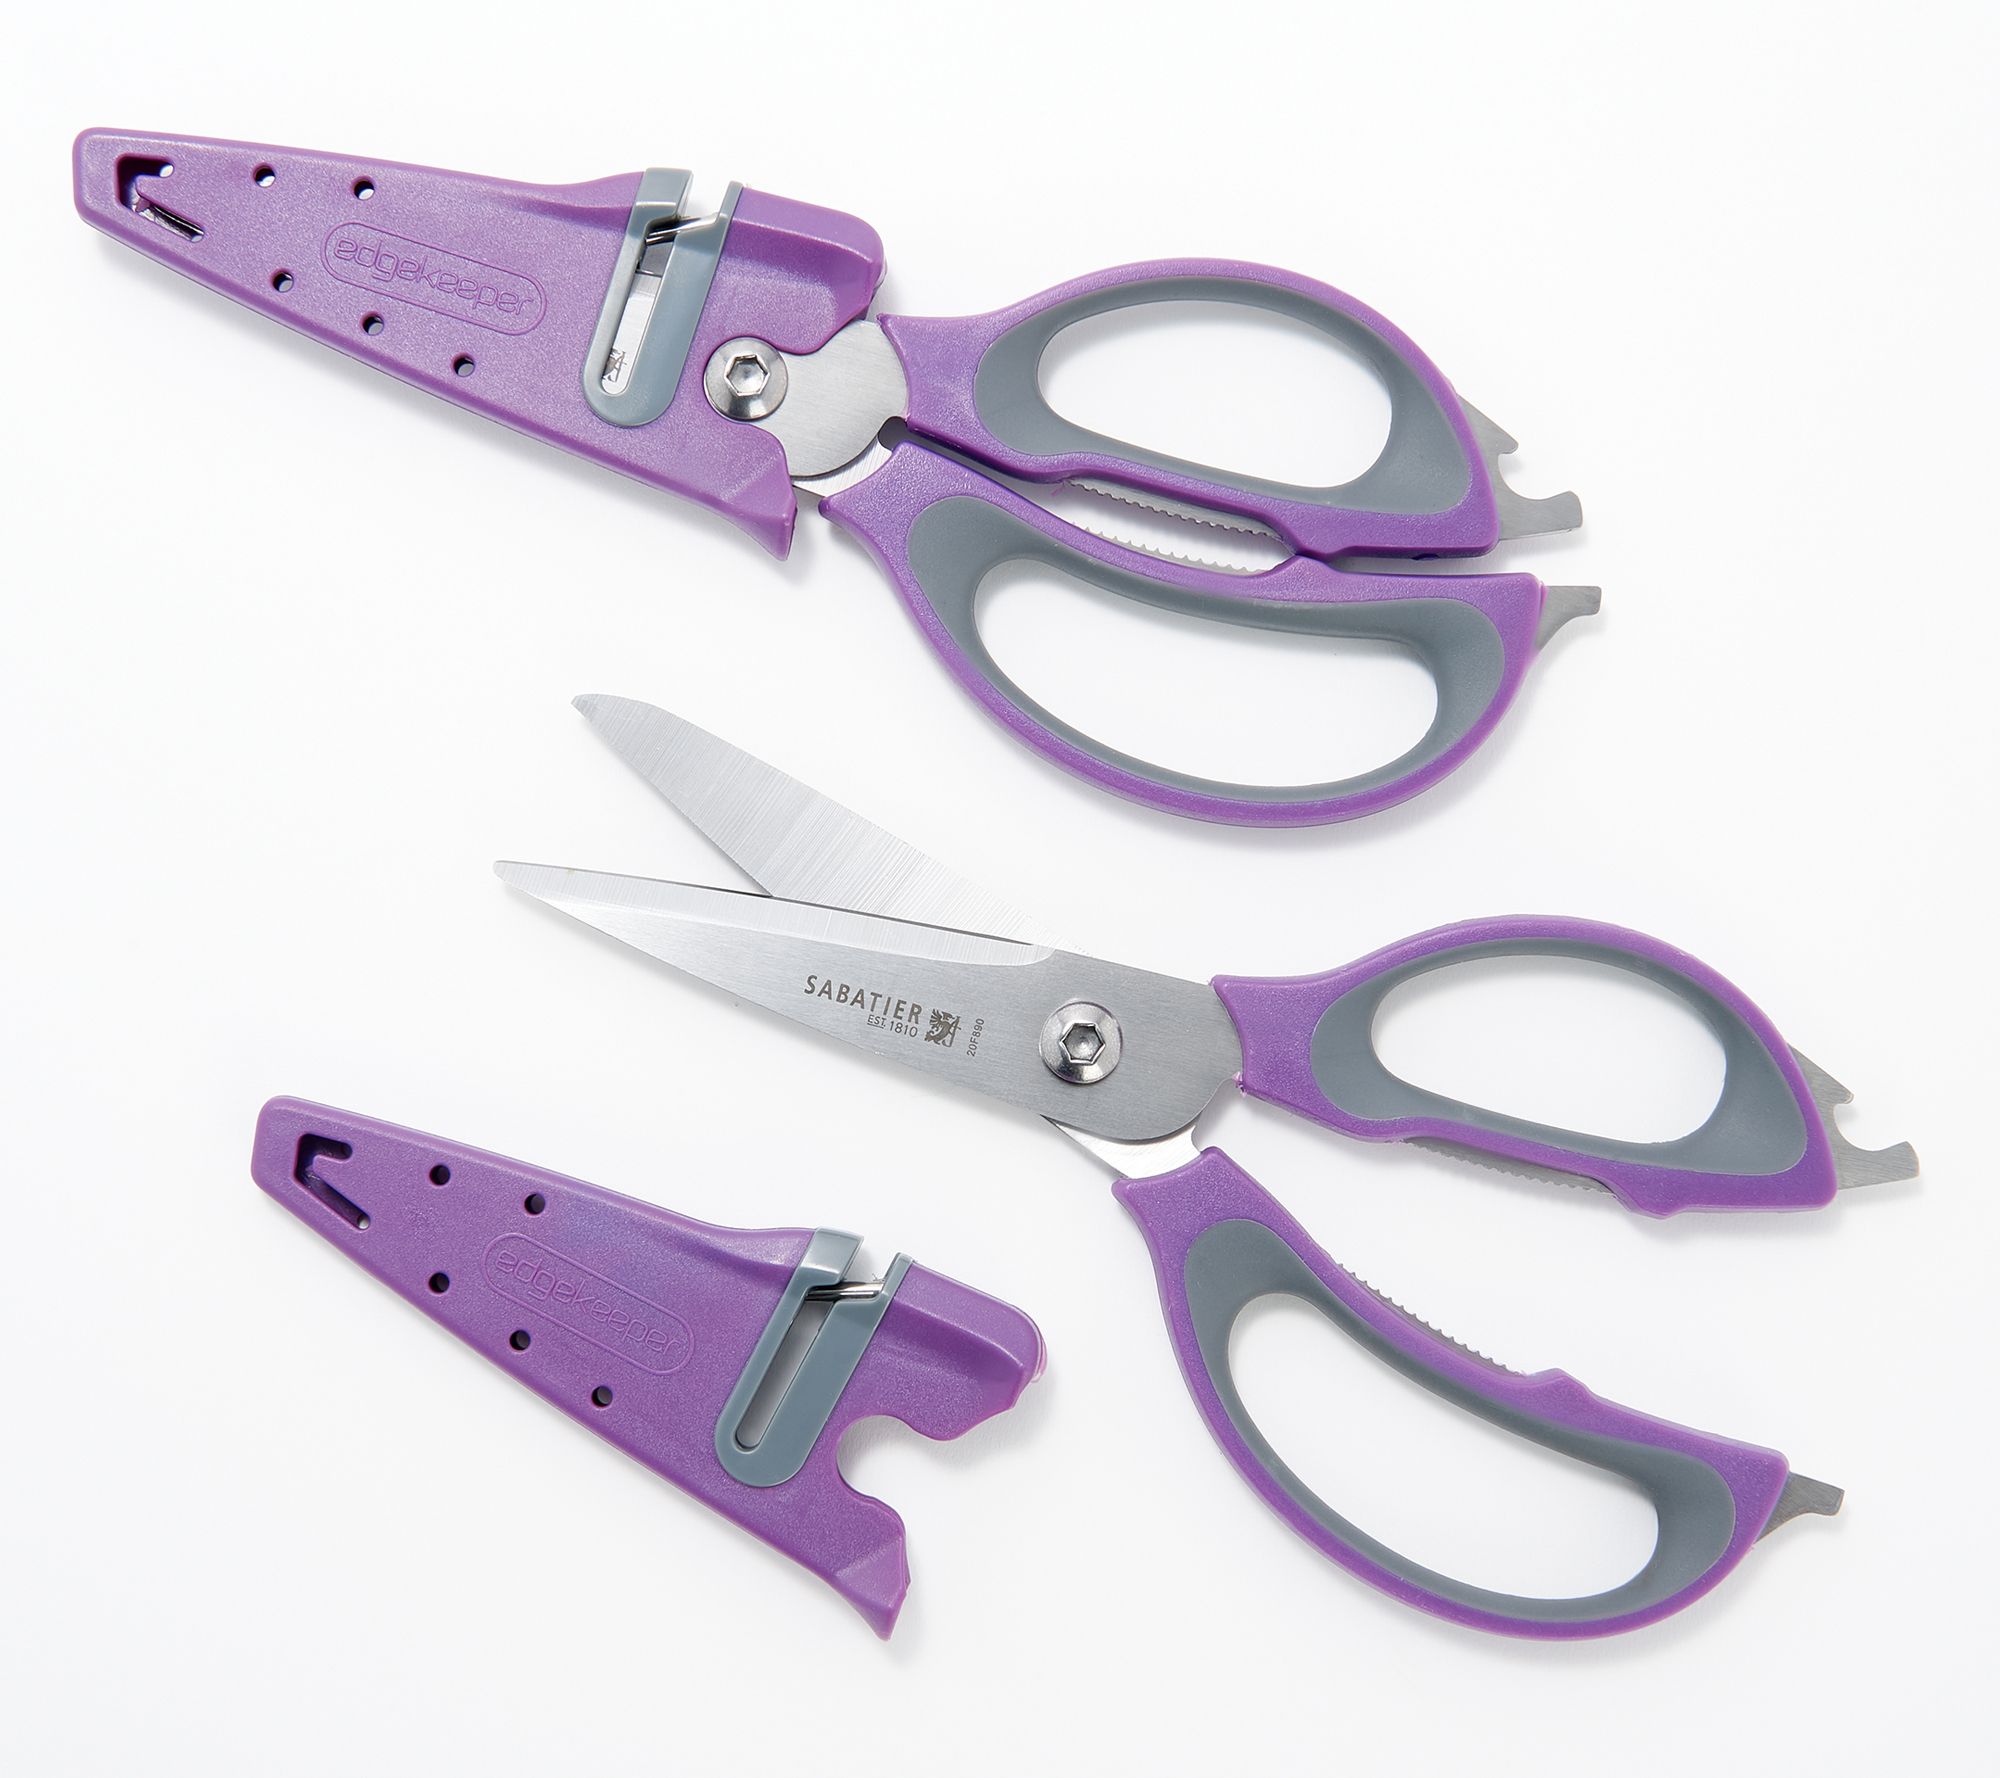 Sabatier 2-in-1 All-Purpose Scissors, Gift Wrap Scissors with Removable Tape Dispenser Blade Cover, Ultra-Sharp Stainless Steel Multi-Purpose